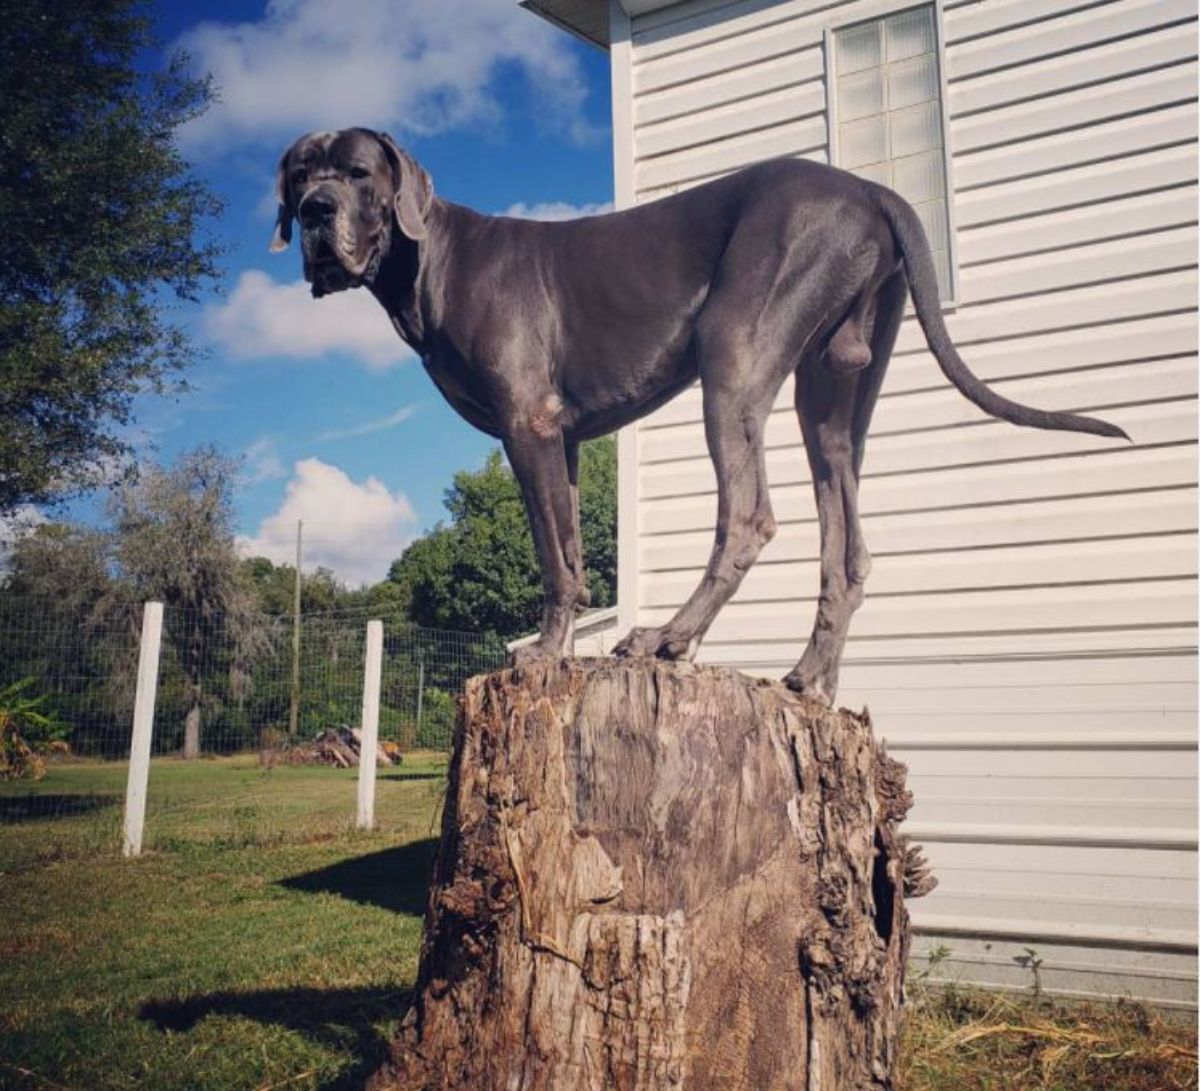 Blue great dane dog on top of a tree trunk